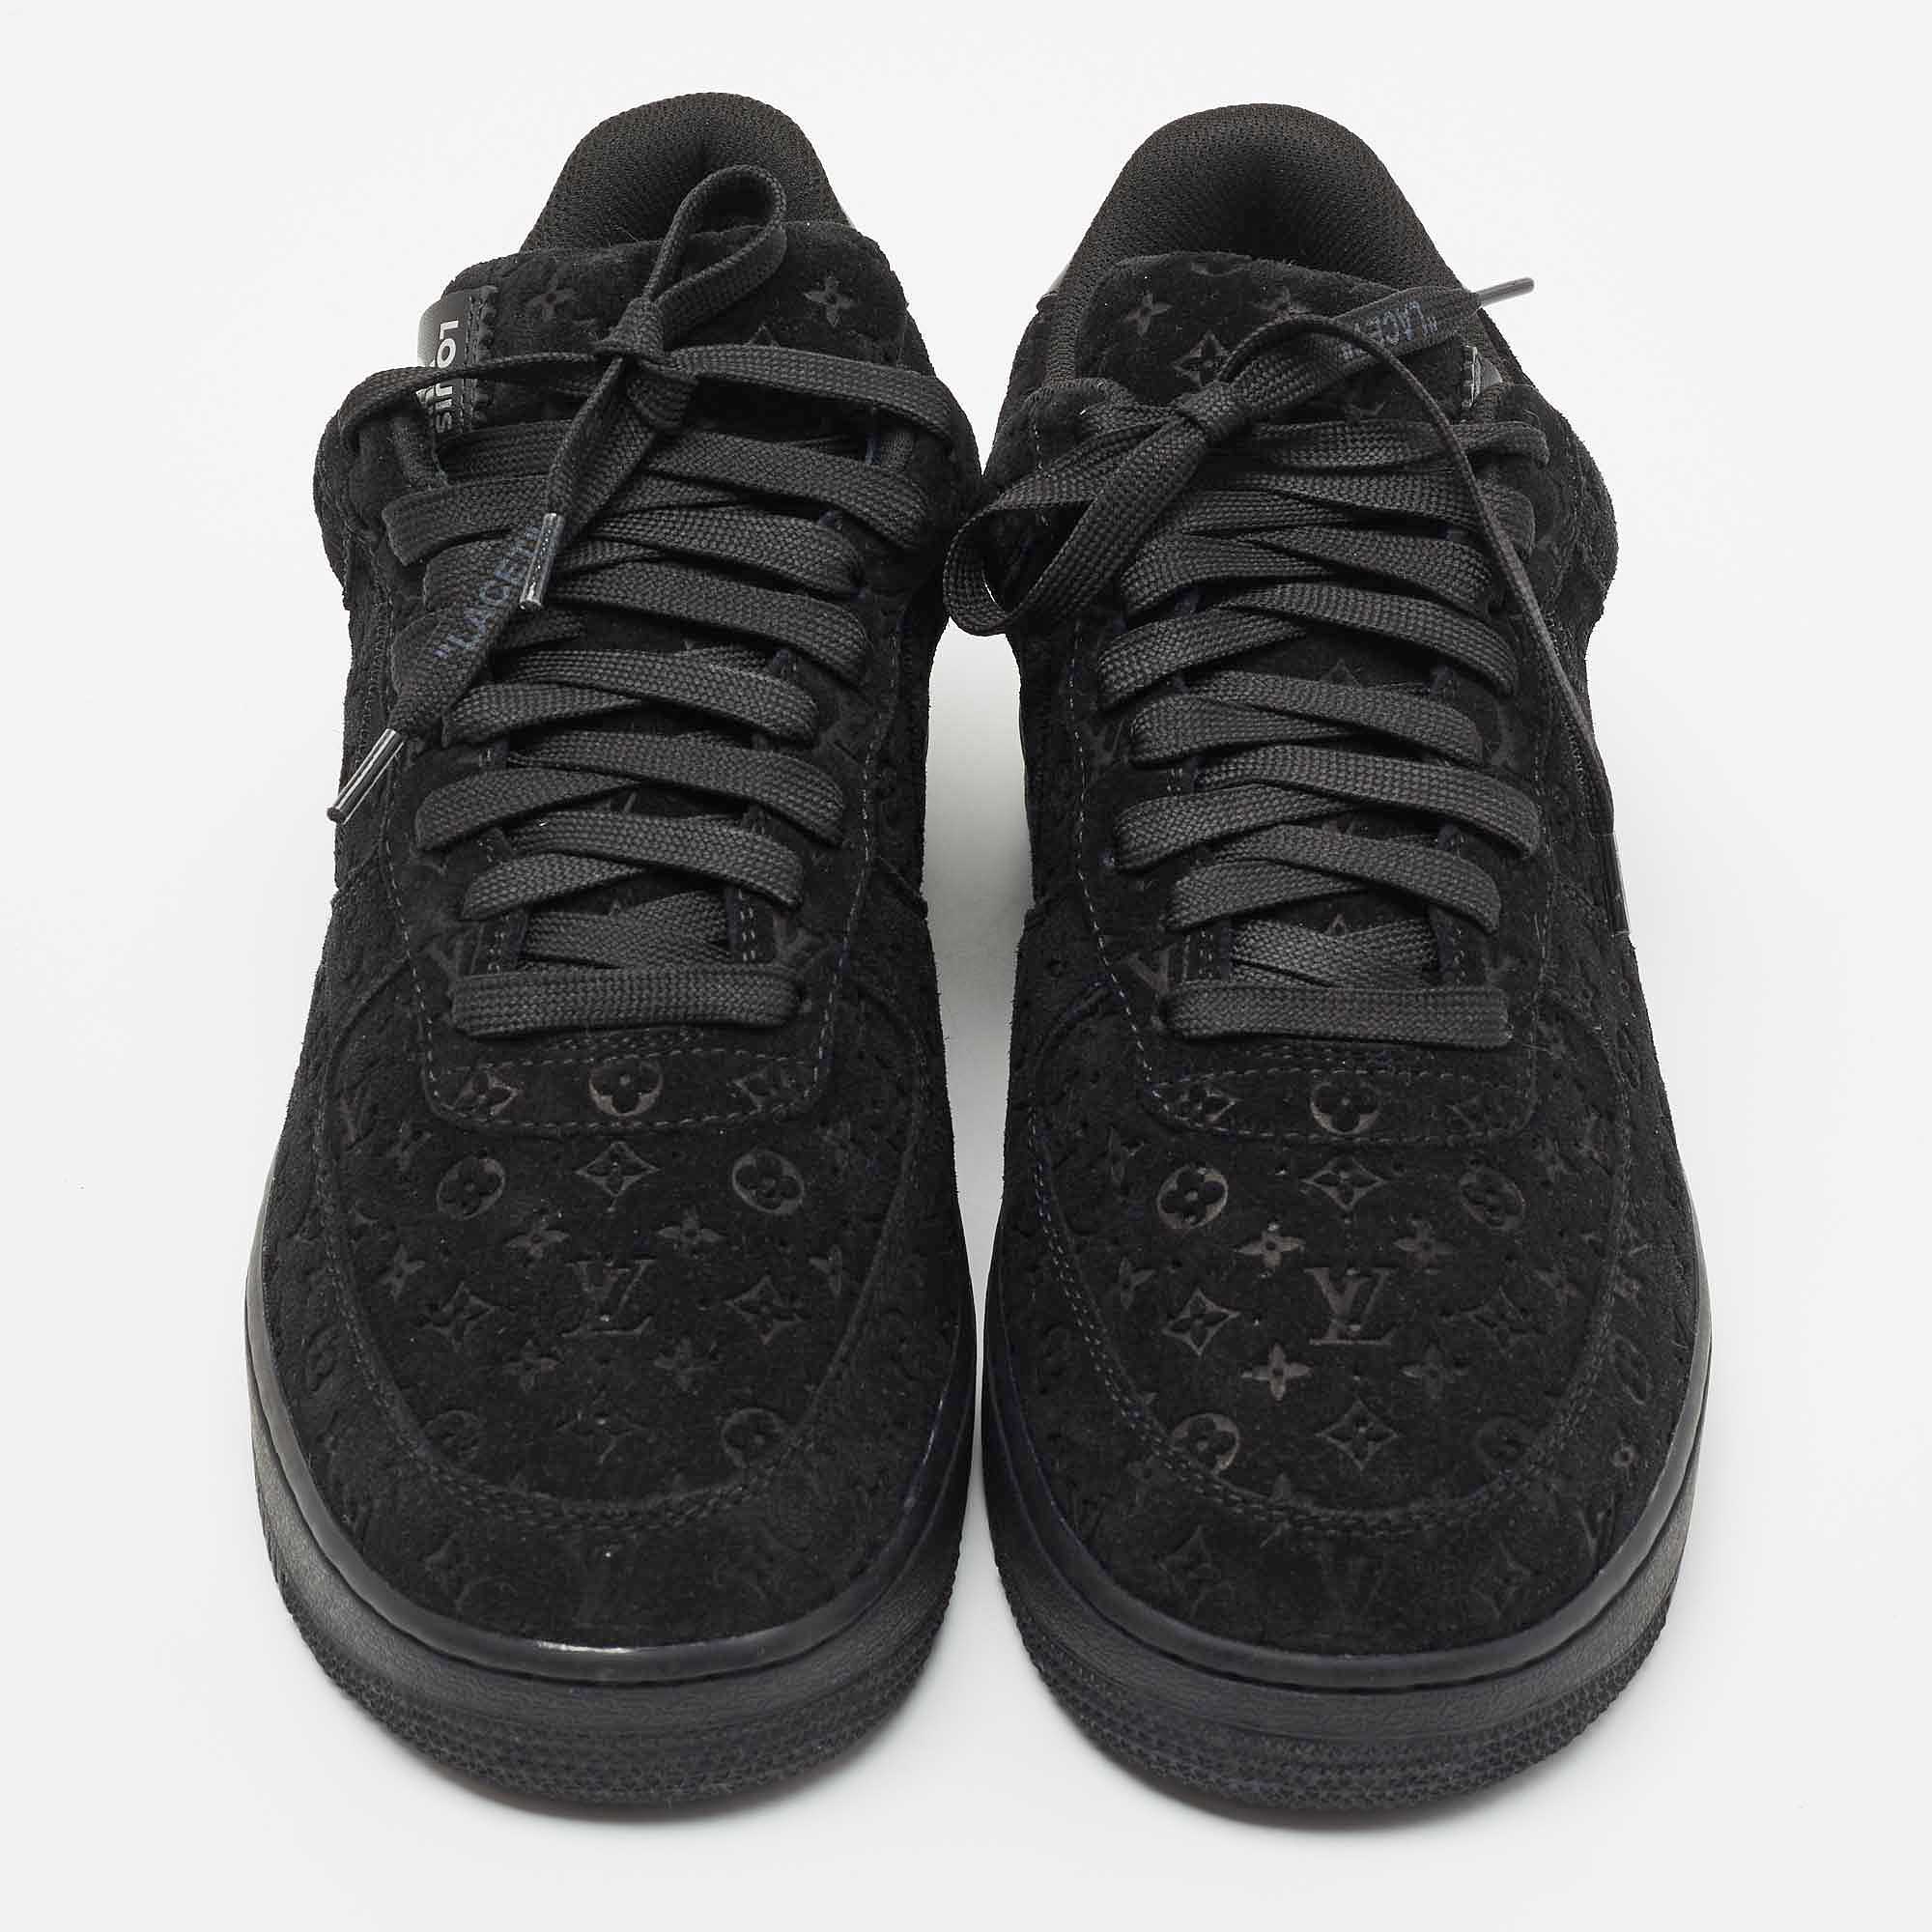 $5500. Brand New Louis Vuitton x Nike AF1 Black Suede. Size 8.5